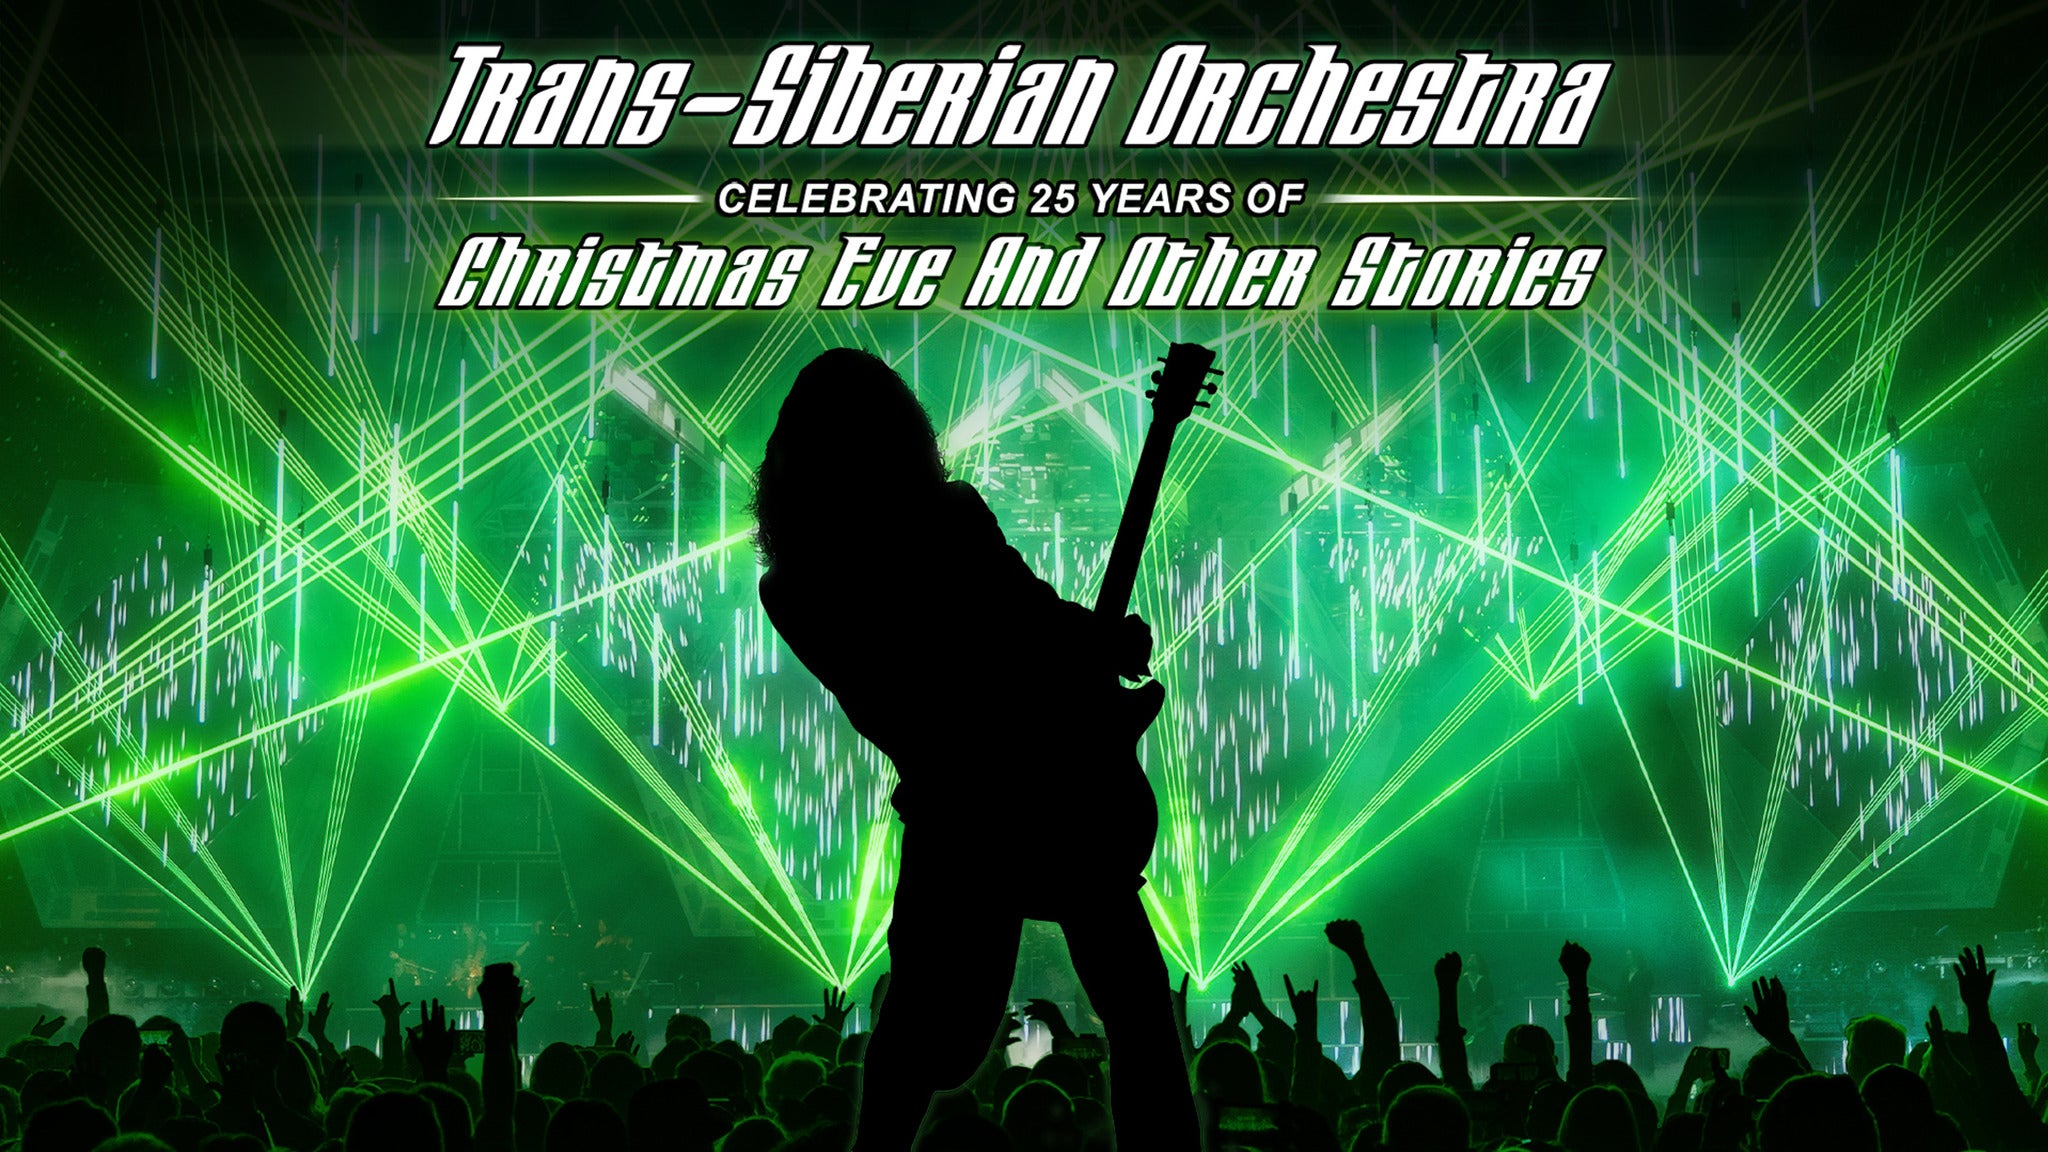 Trans-Siberian Orchestra-Christmas Eve & Other Stories in Toledo promo photo for Loudwire presale offer code